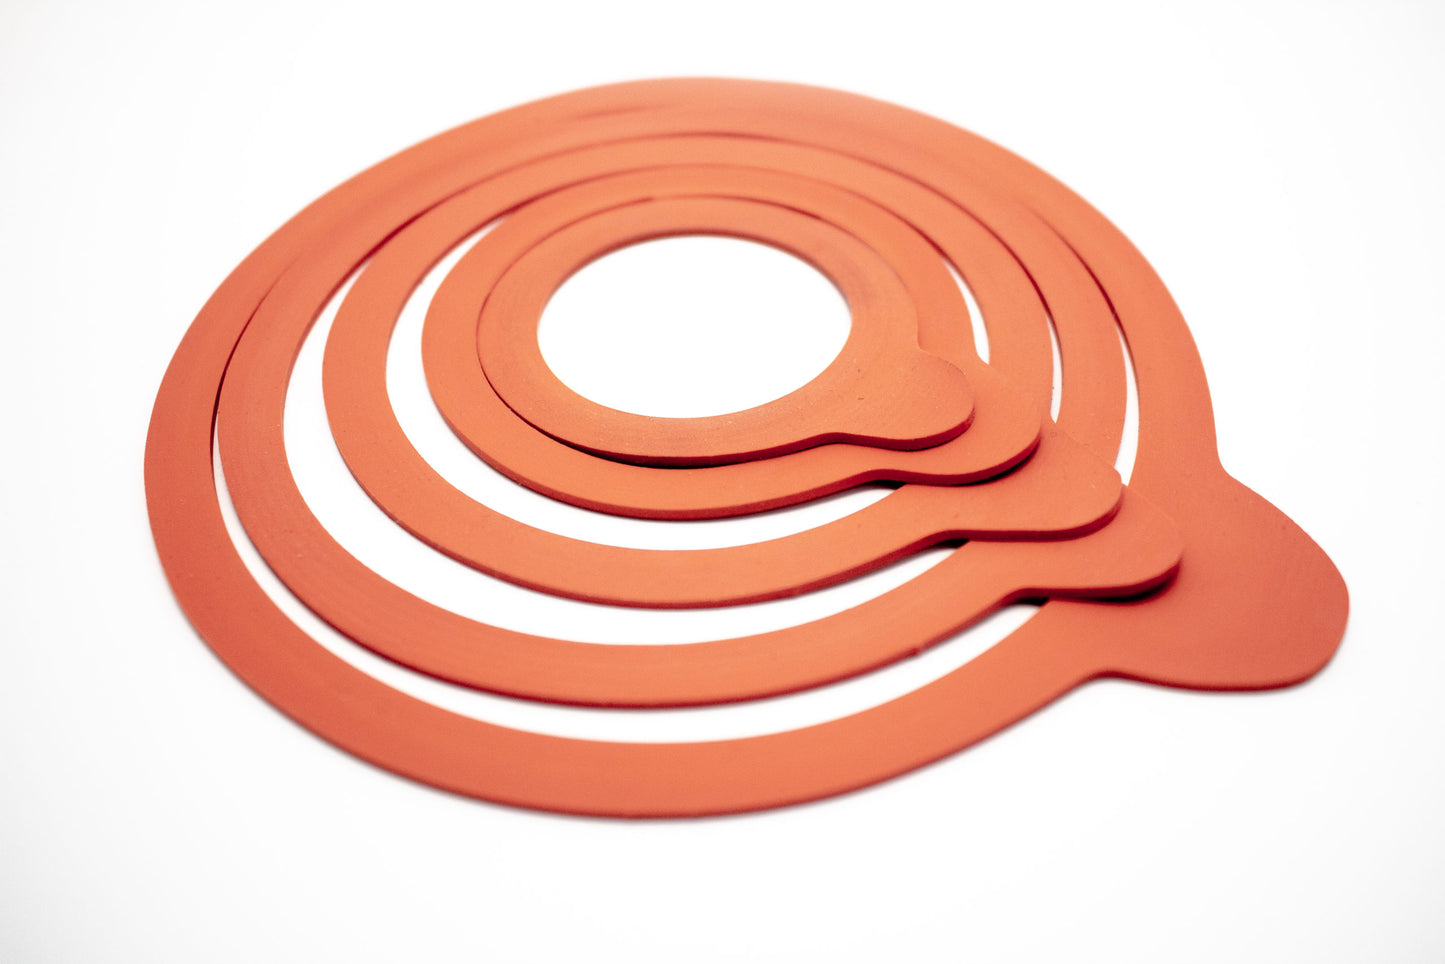 WECK Rubber Gasket -10 Count